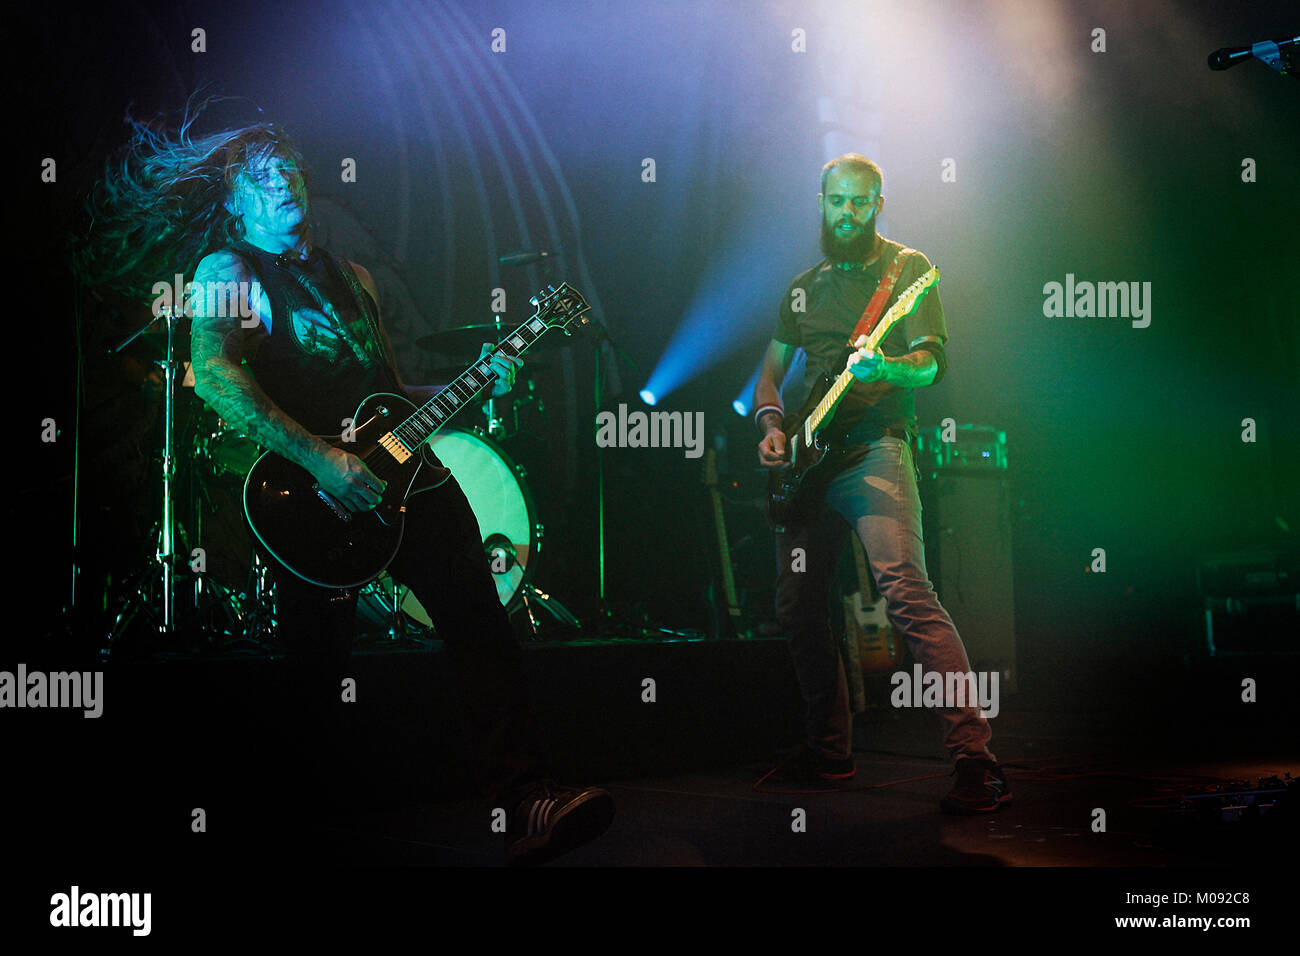 The American metal band Baroness performs a live concert at Das Freizeitzentrum West (FZW) in Dortmund. Here vocalist and guitarist John Baizley (R) is pictured live on stage with Peter Adams (L). Germany, 03/10 2013. Stock Photo